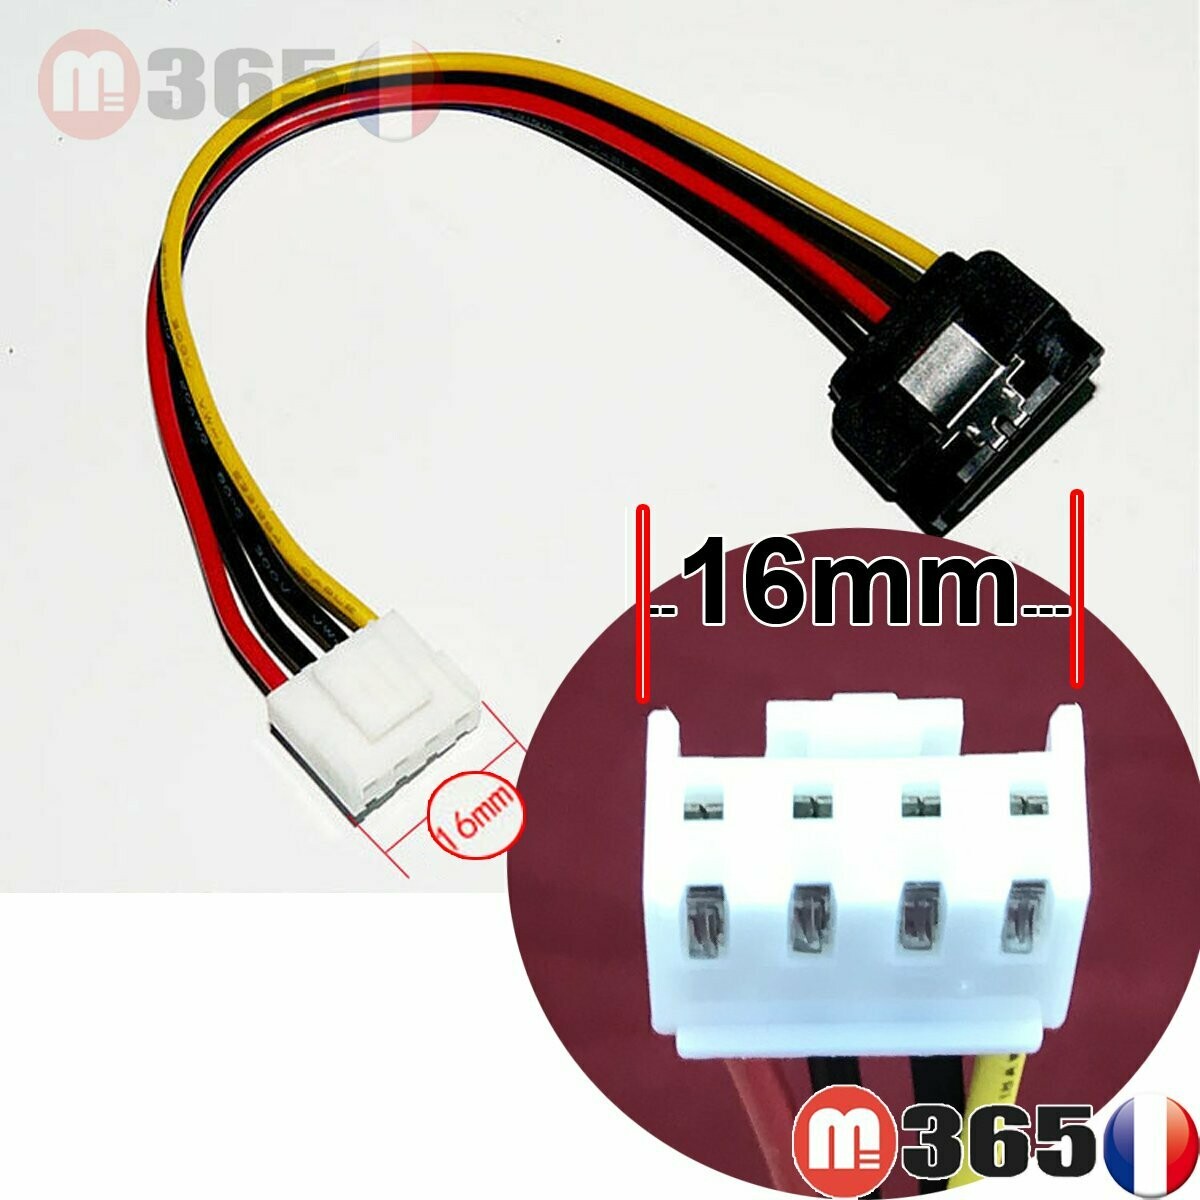 Cable sata vers 4 pins Alimentation carte mere format 16mm